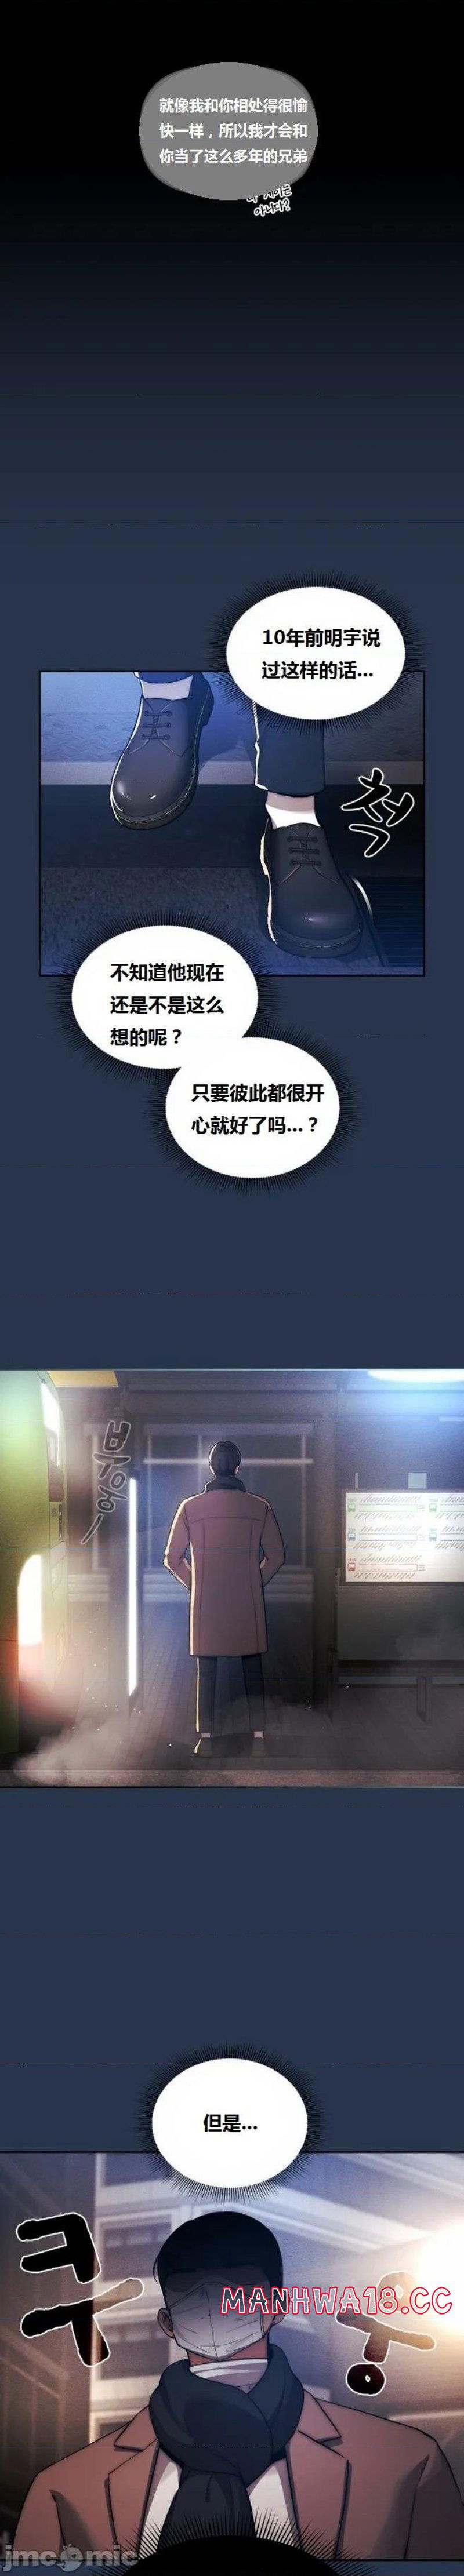 private-tutoring-in-pandemic-raw-chap-38-15